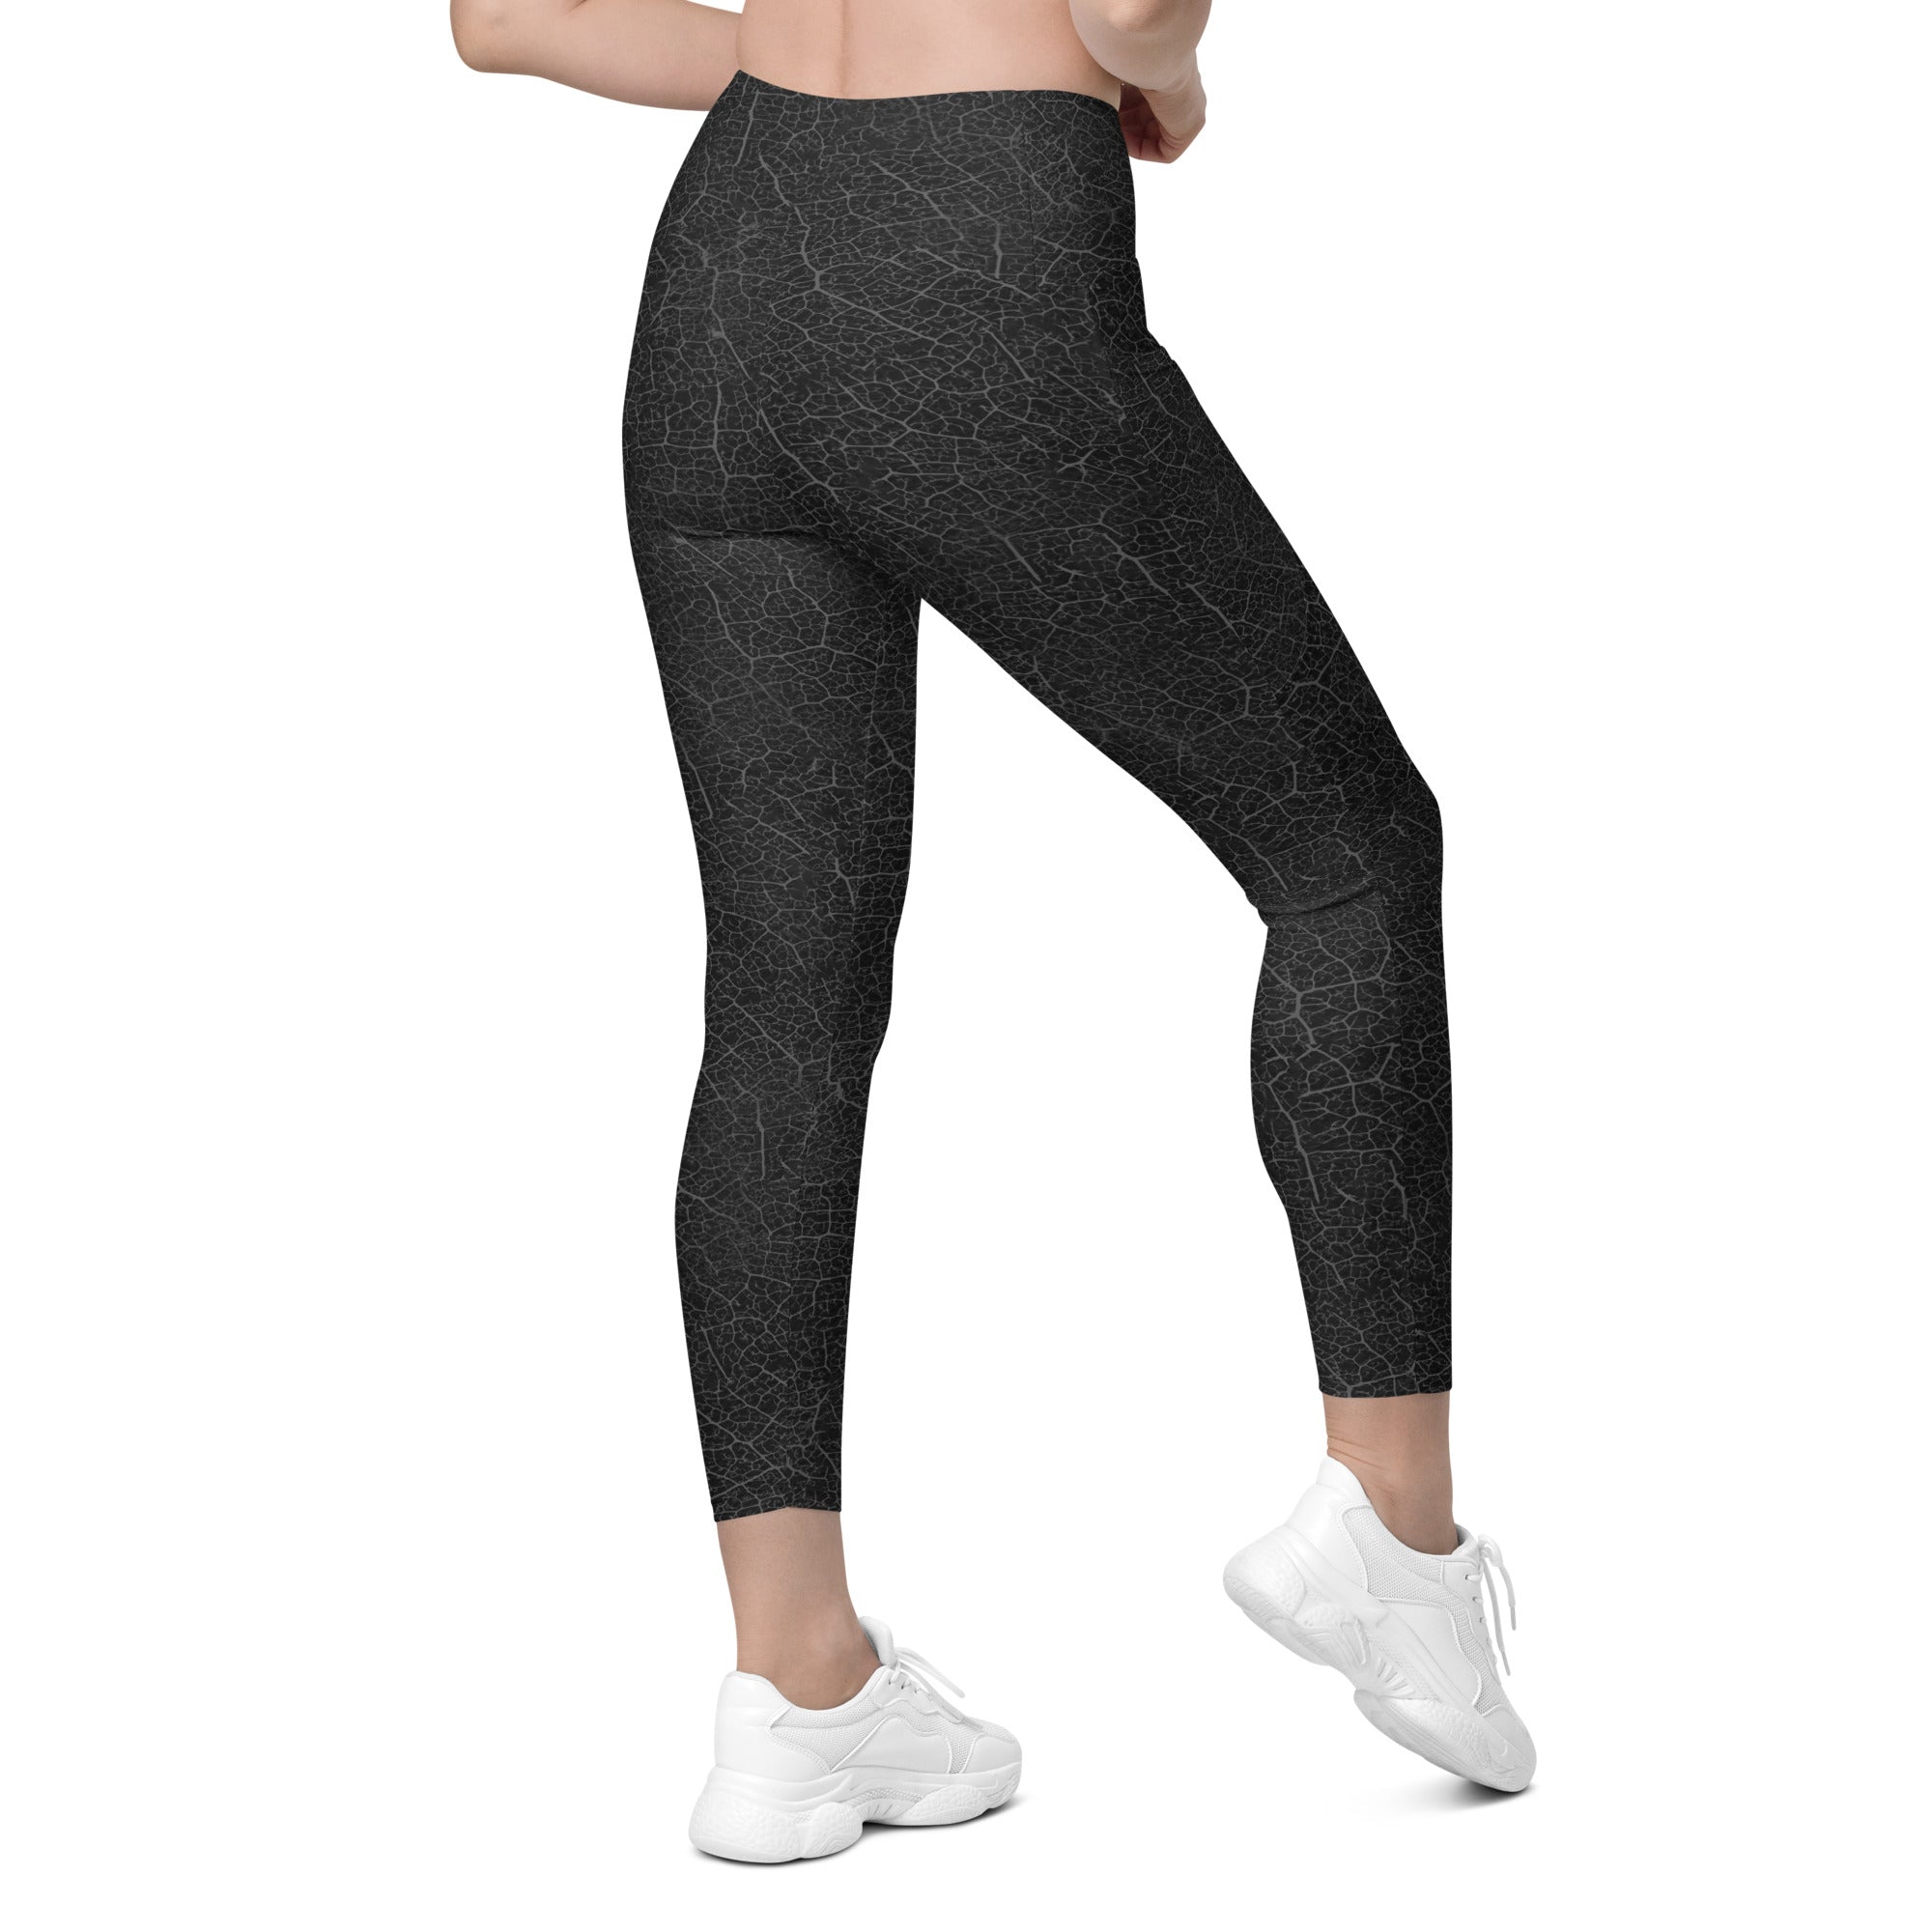 Close-up of Zen Garden Leggings' crossover waistband, offering a blend of style and comfort for any activity.